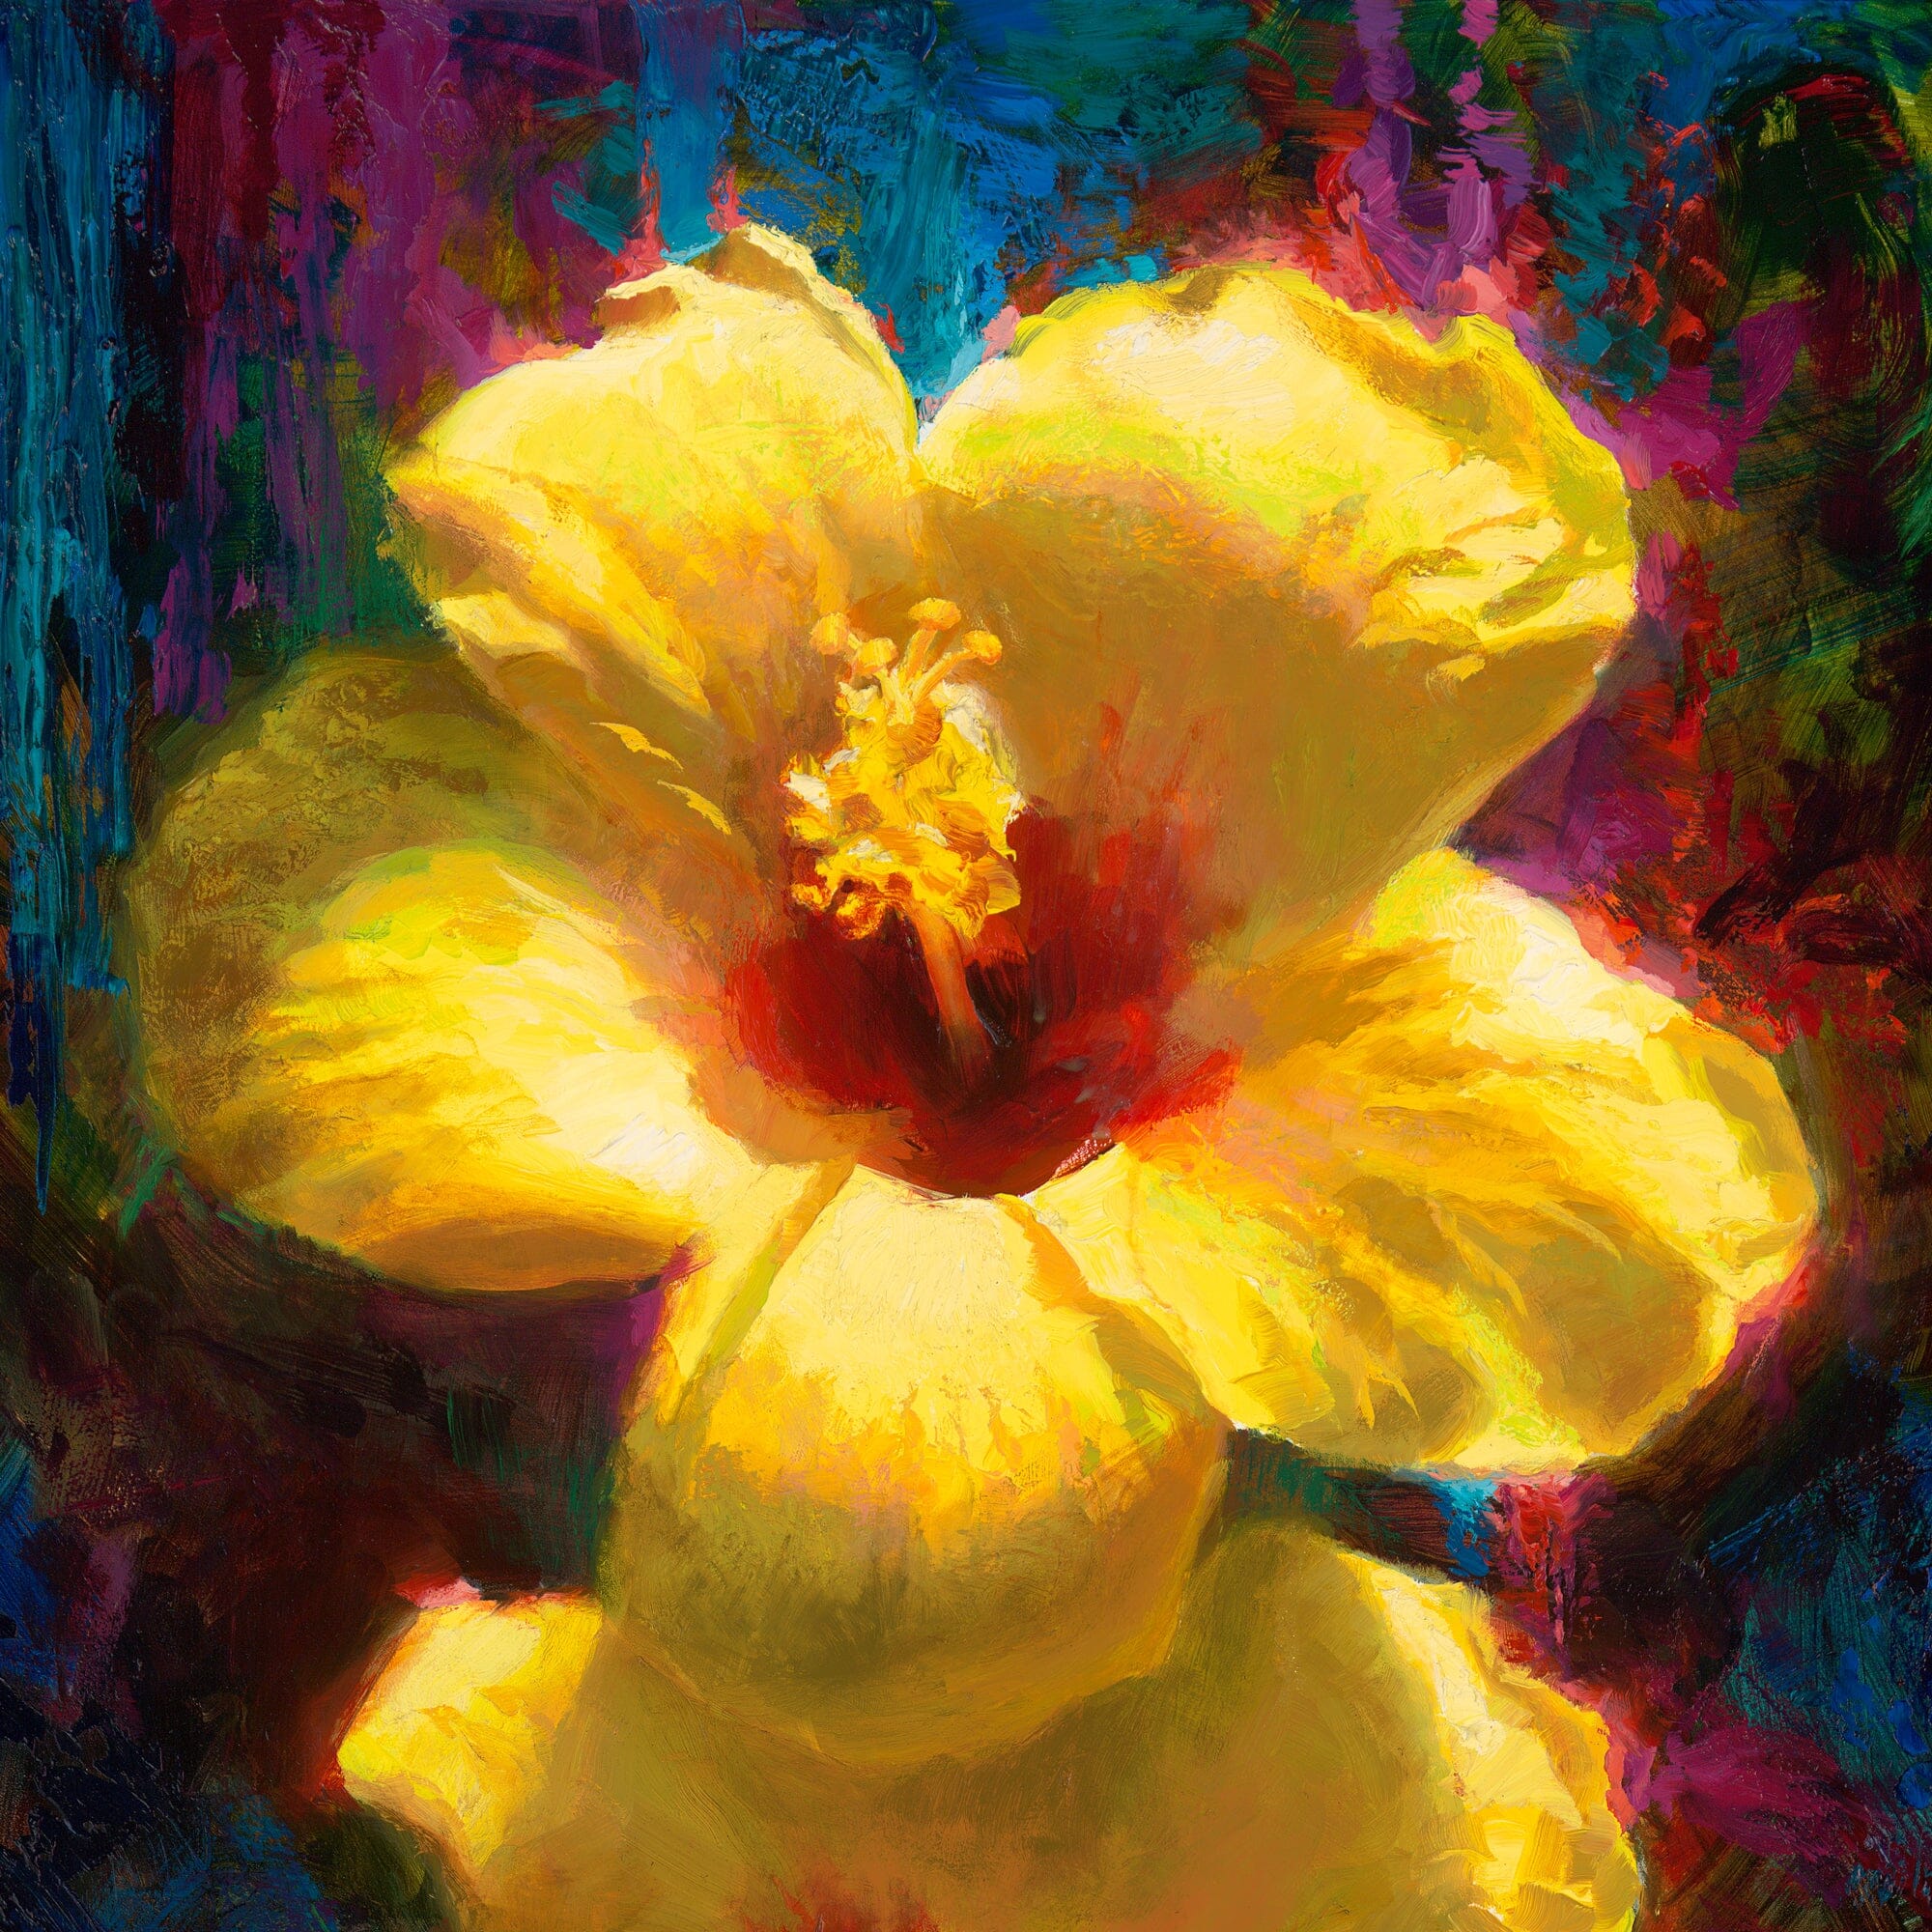 Crop of hibiscus painting "Past Present Future" by artist Karen Whitworth